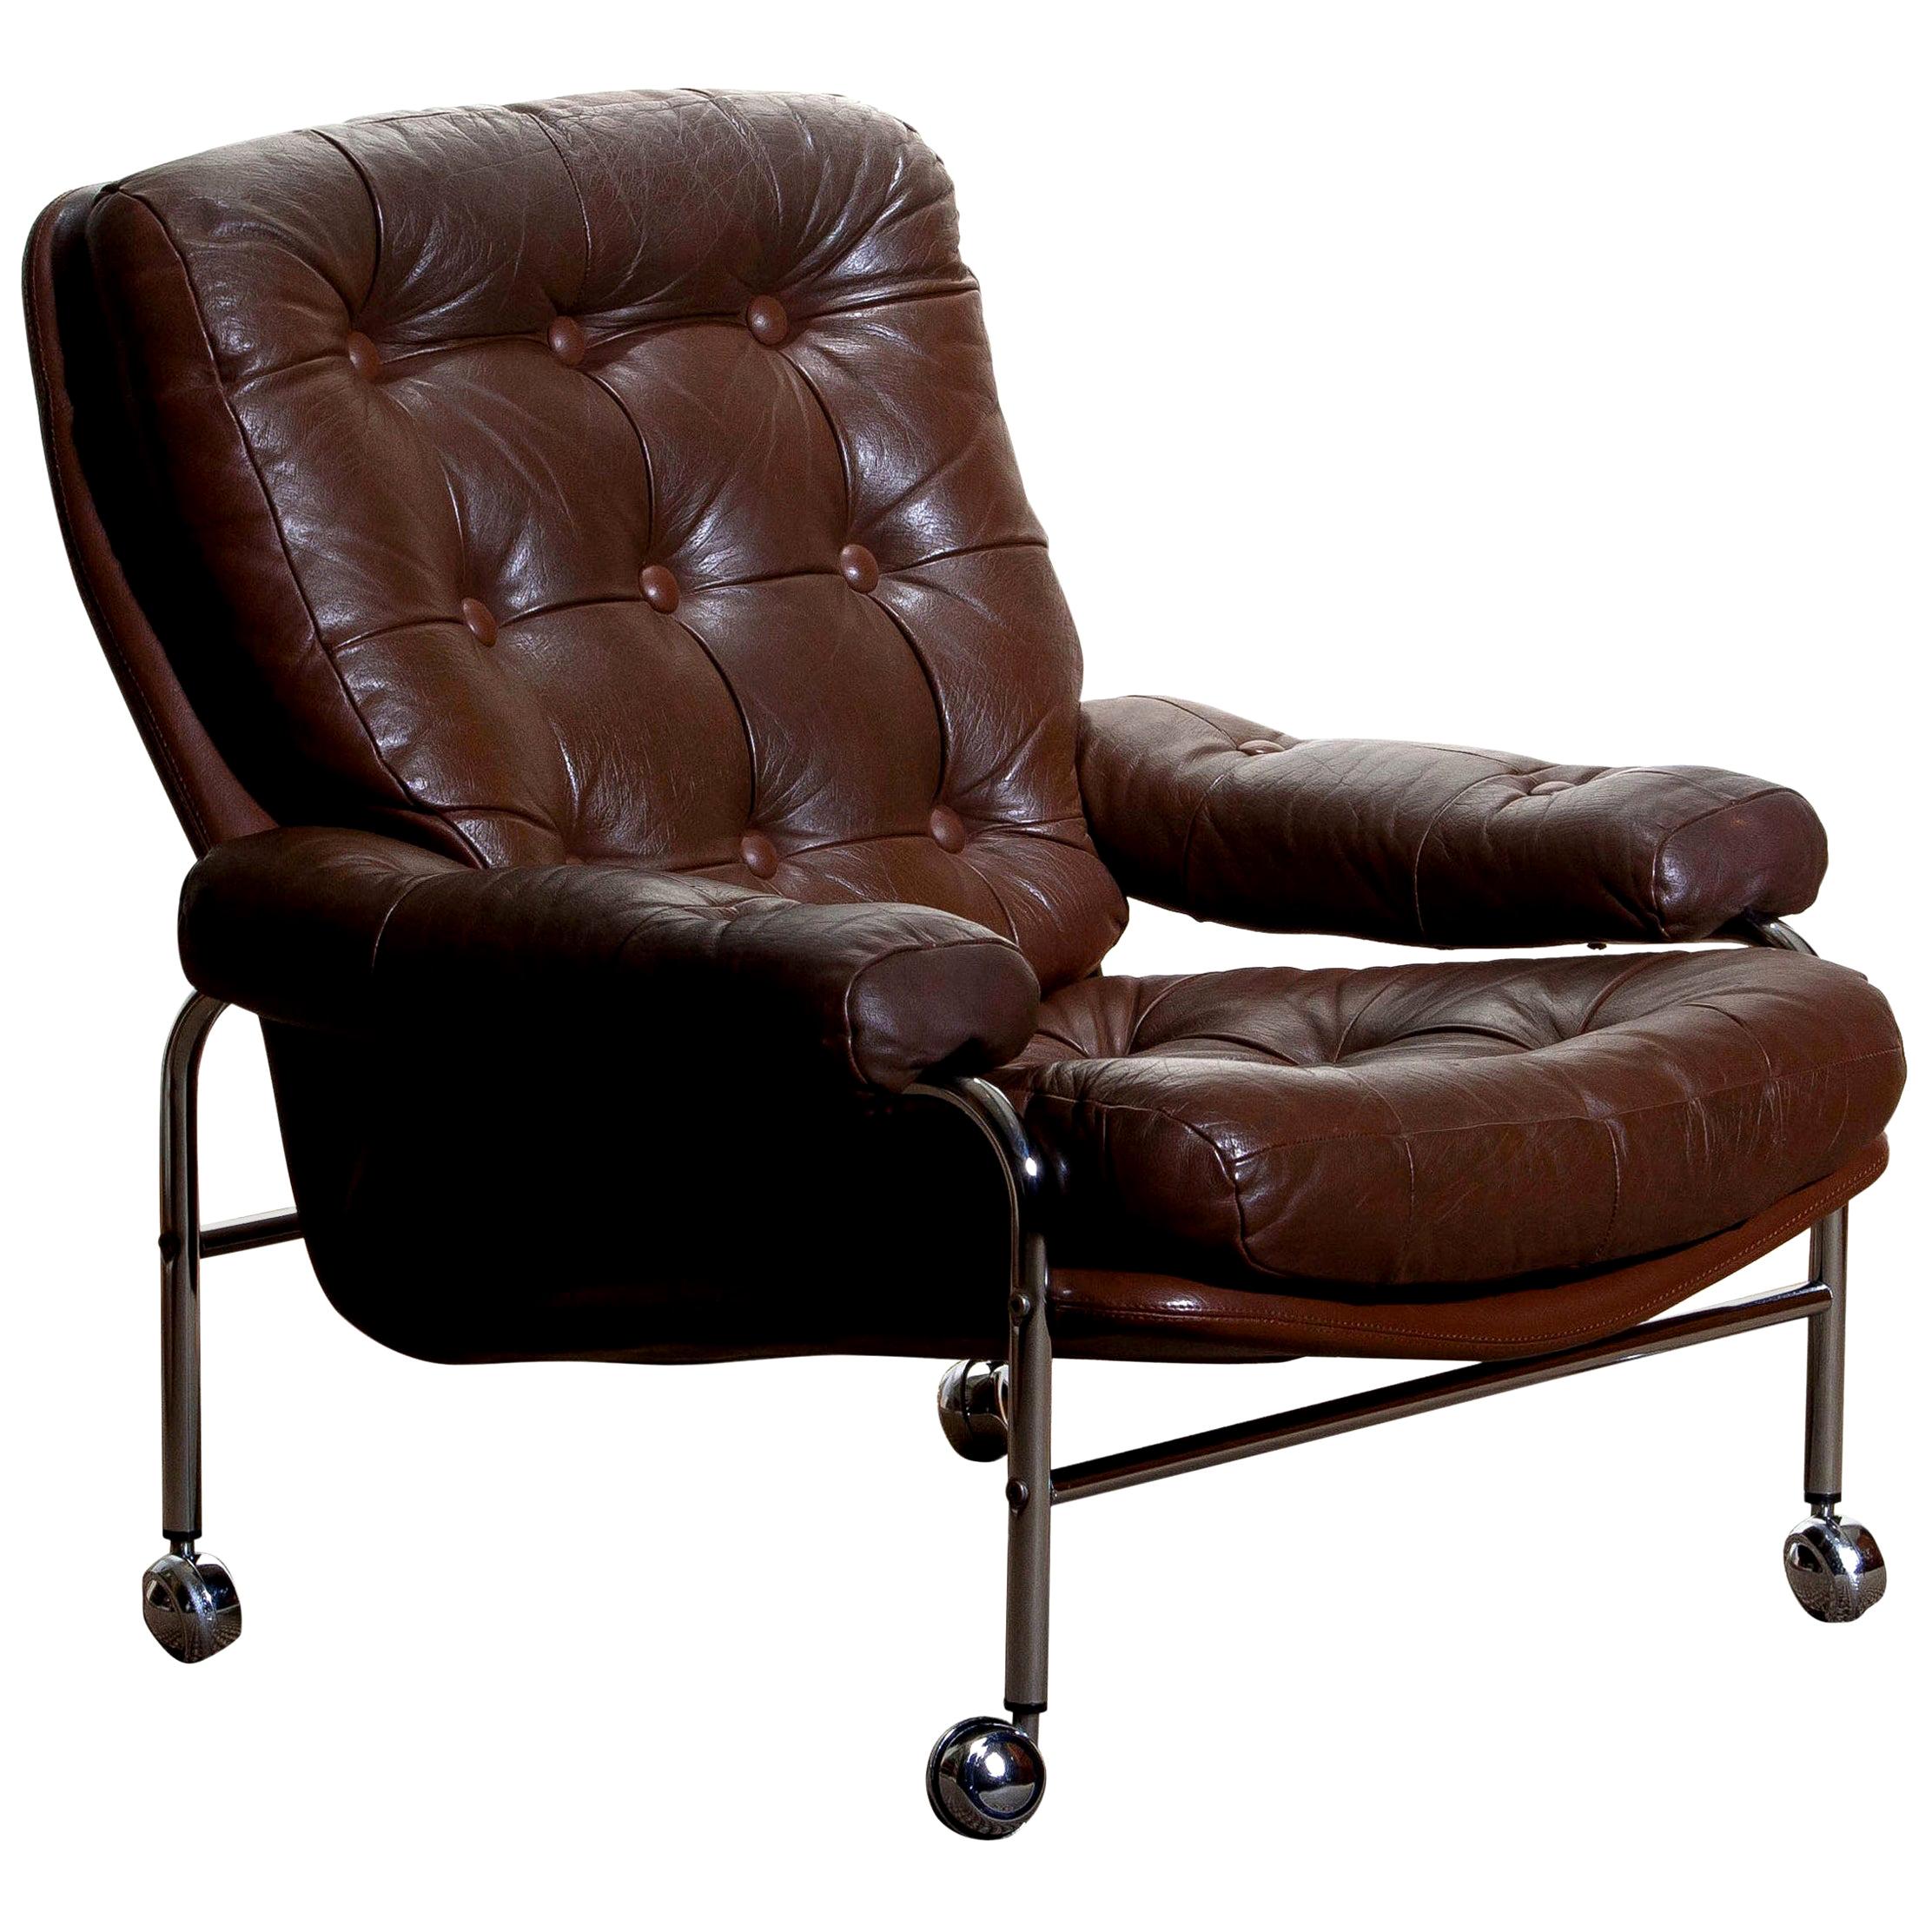 1970s, Chrome and Brown Leather Easy or Lounge Chair by Scapa Rydaholm, Sweden